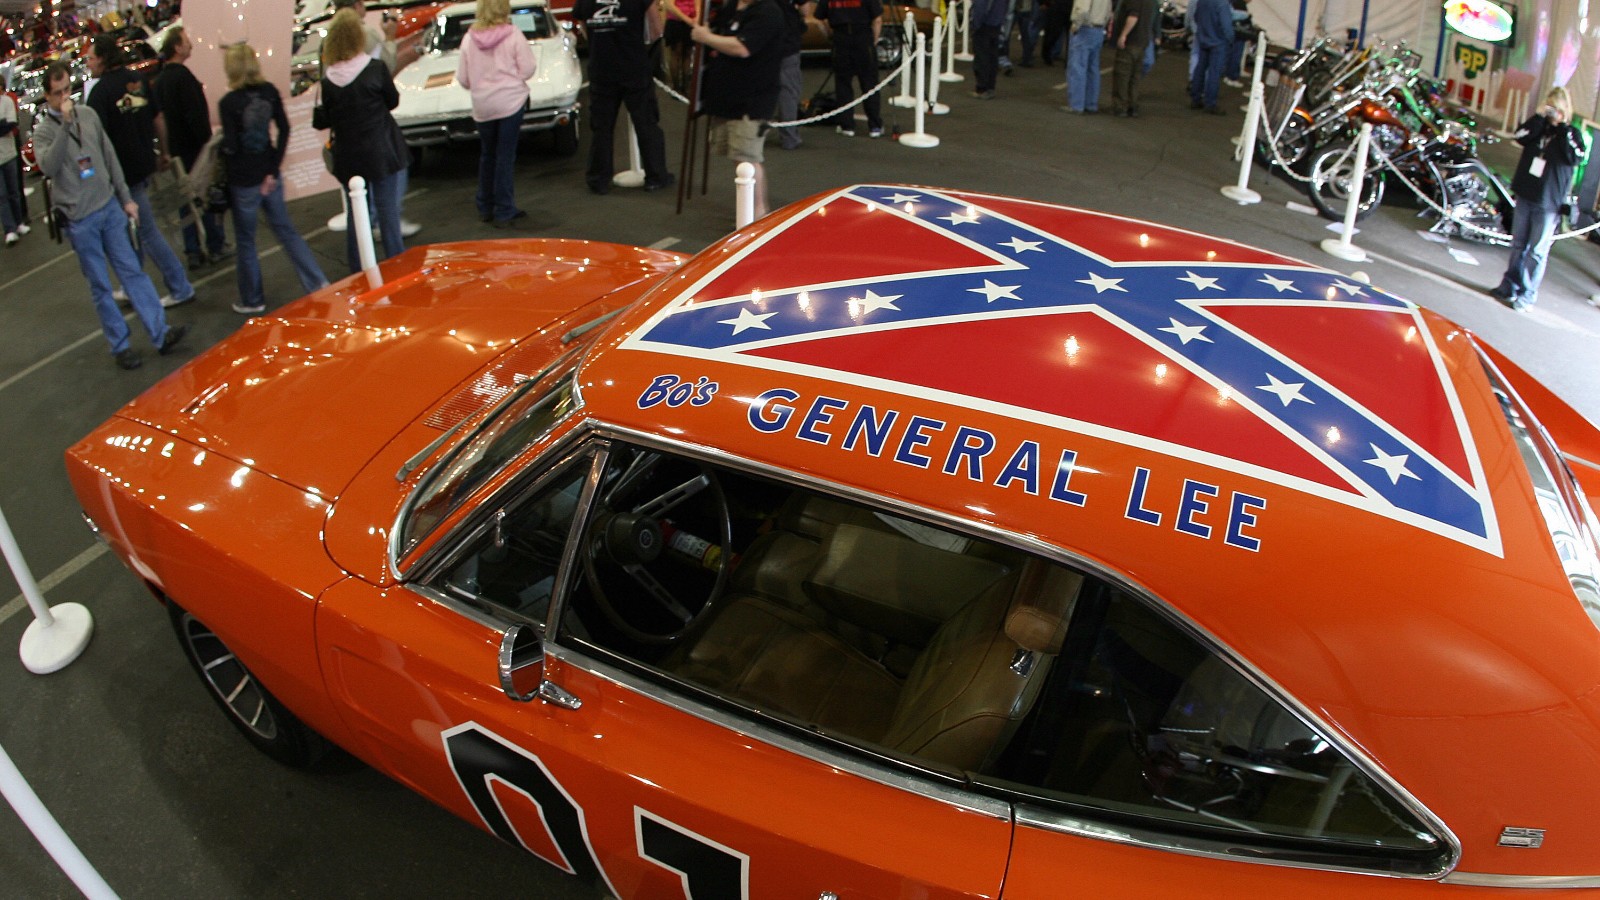 The General Lee ‘Dukes of Hazzard’ museum is not moving, the museum says